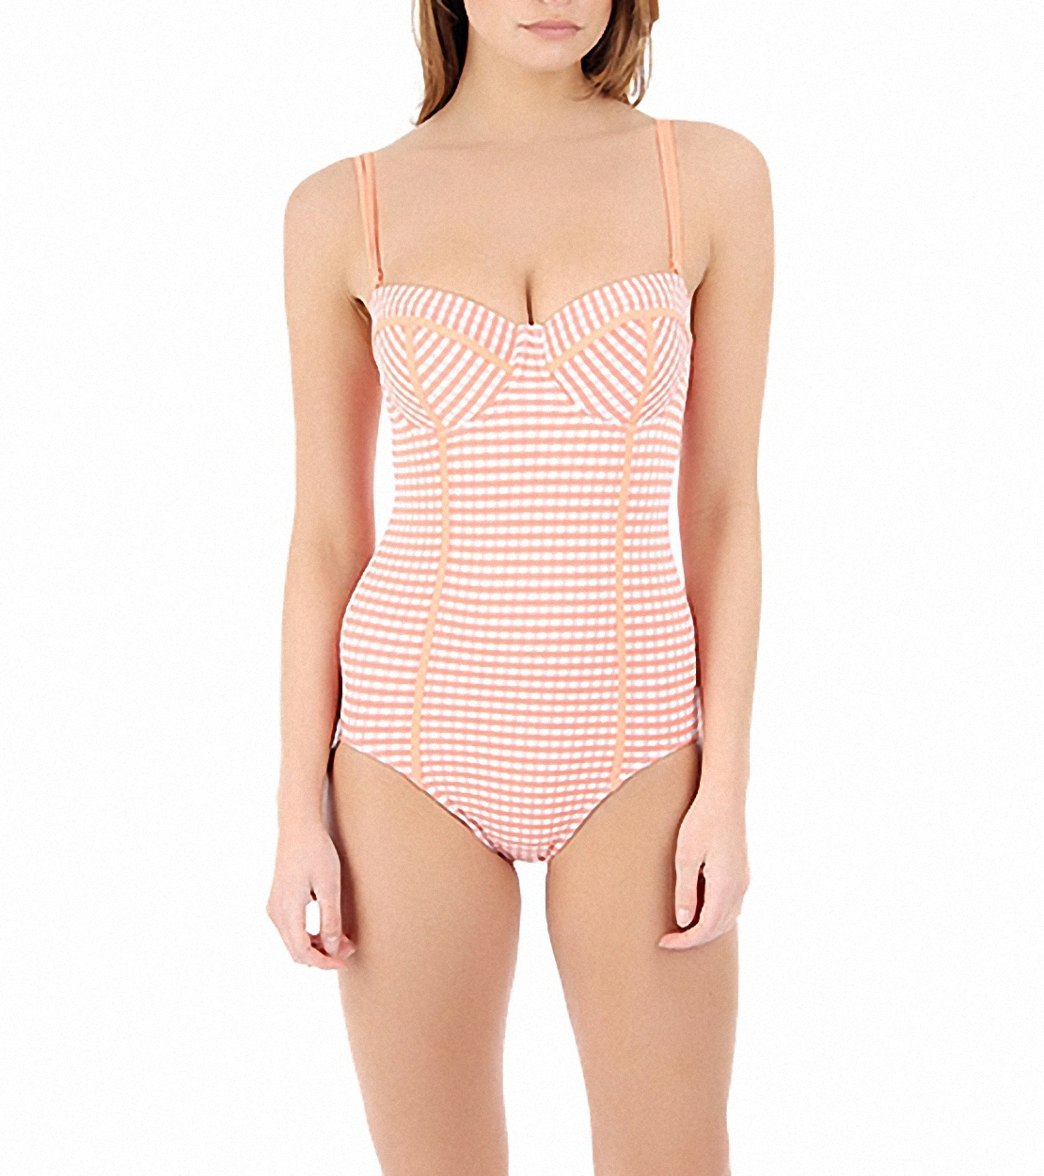 Seafolly Women's Lucia D Cup Maillot at SwimOutlet.com - Free Shipping